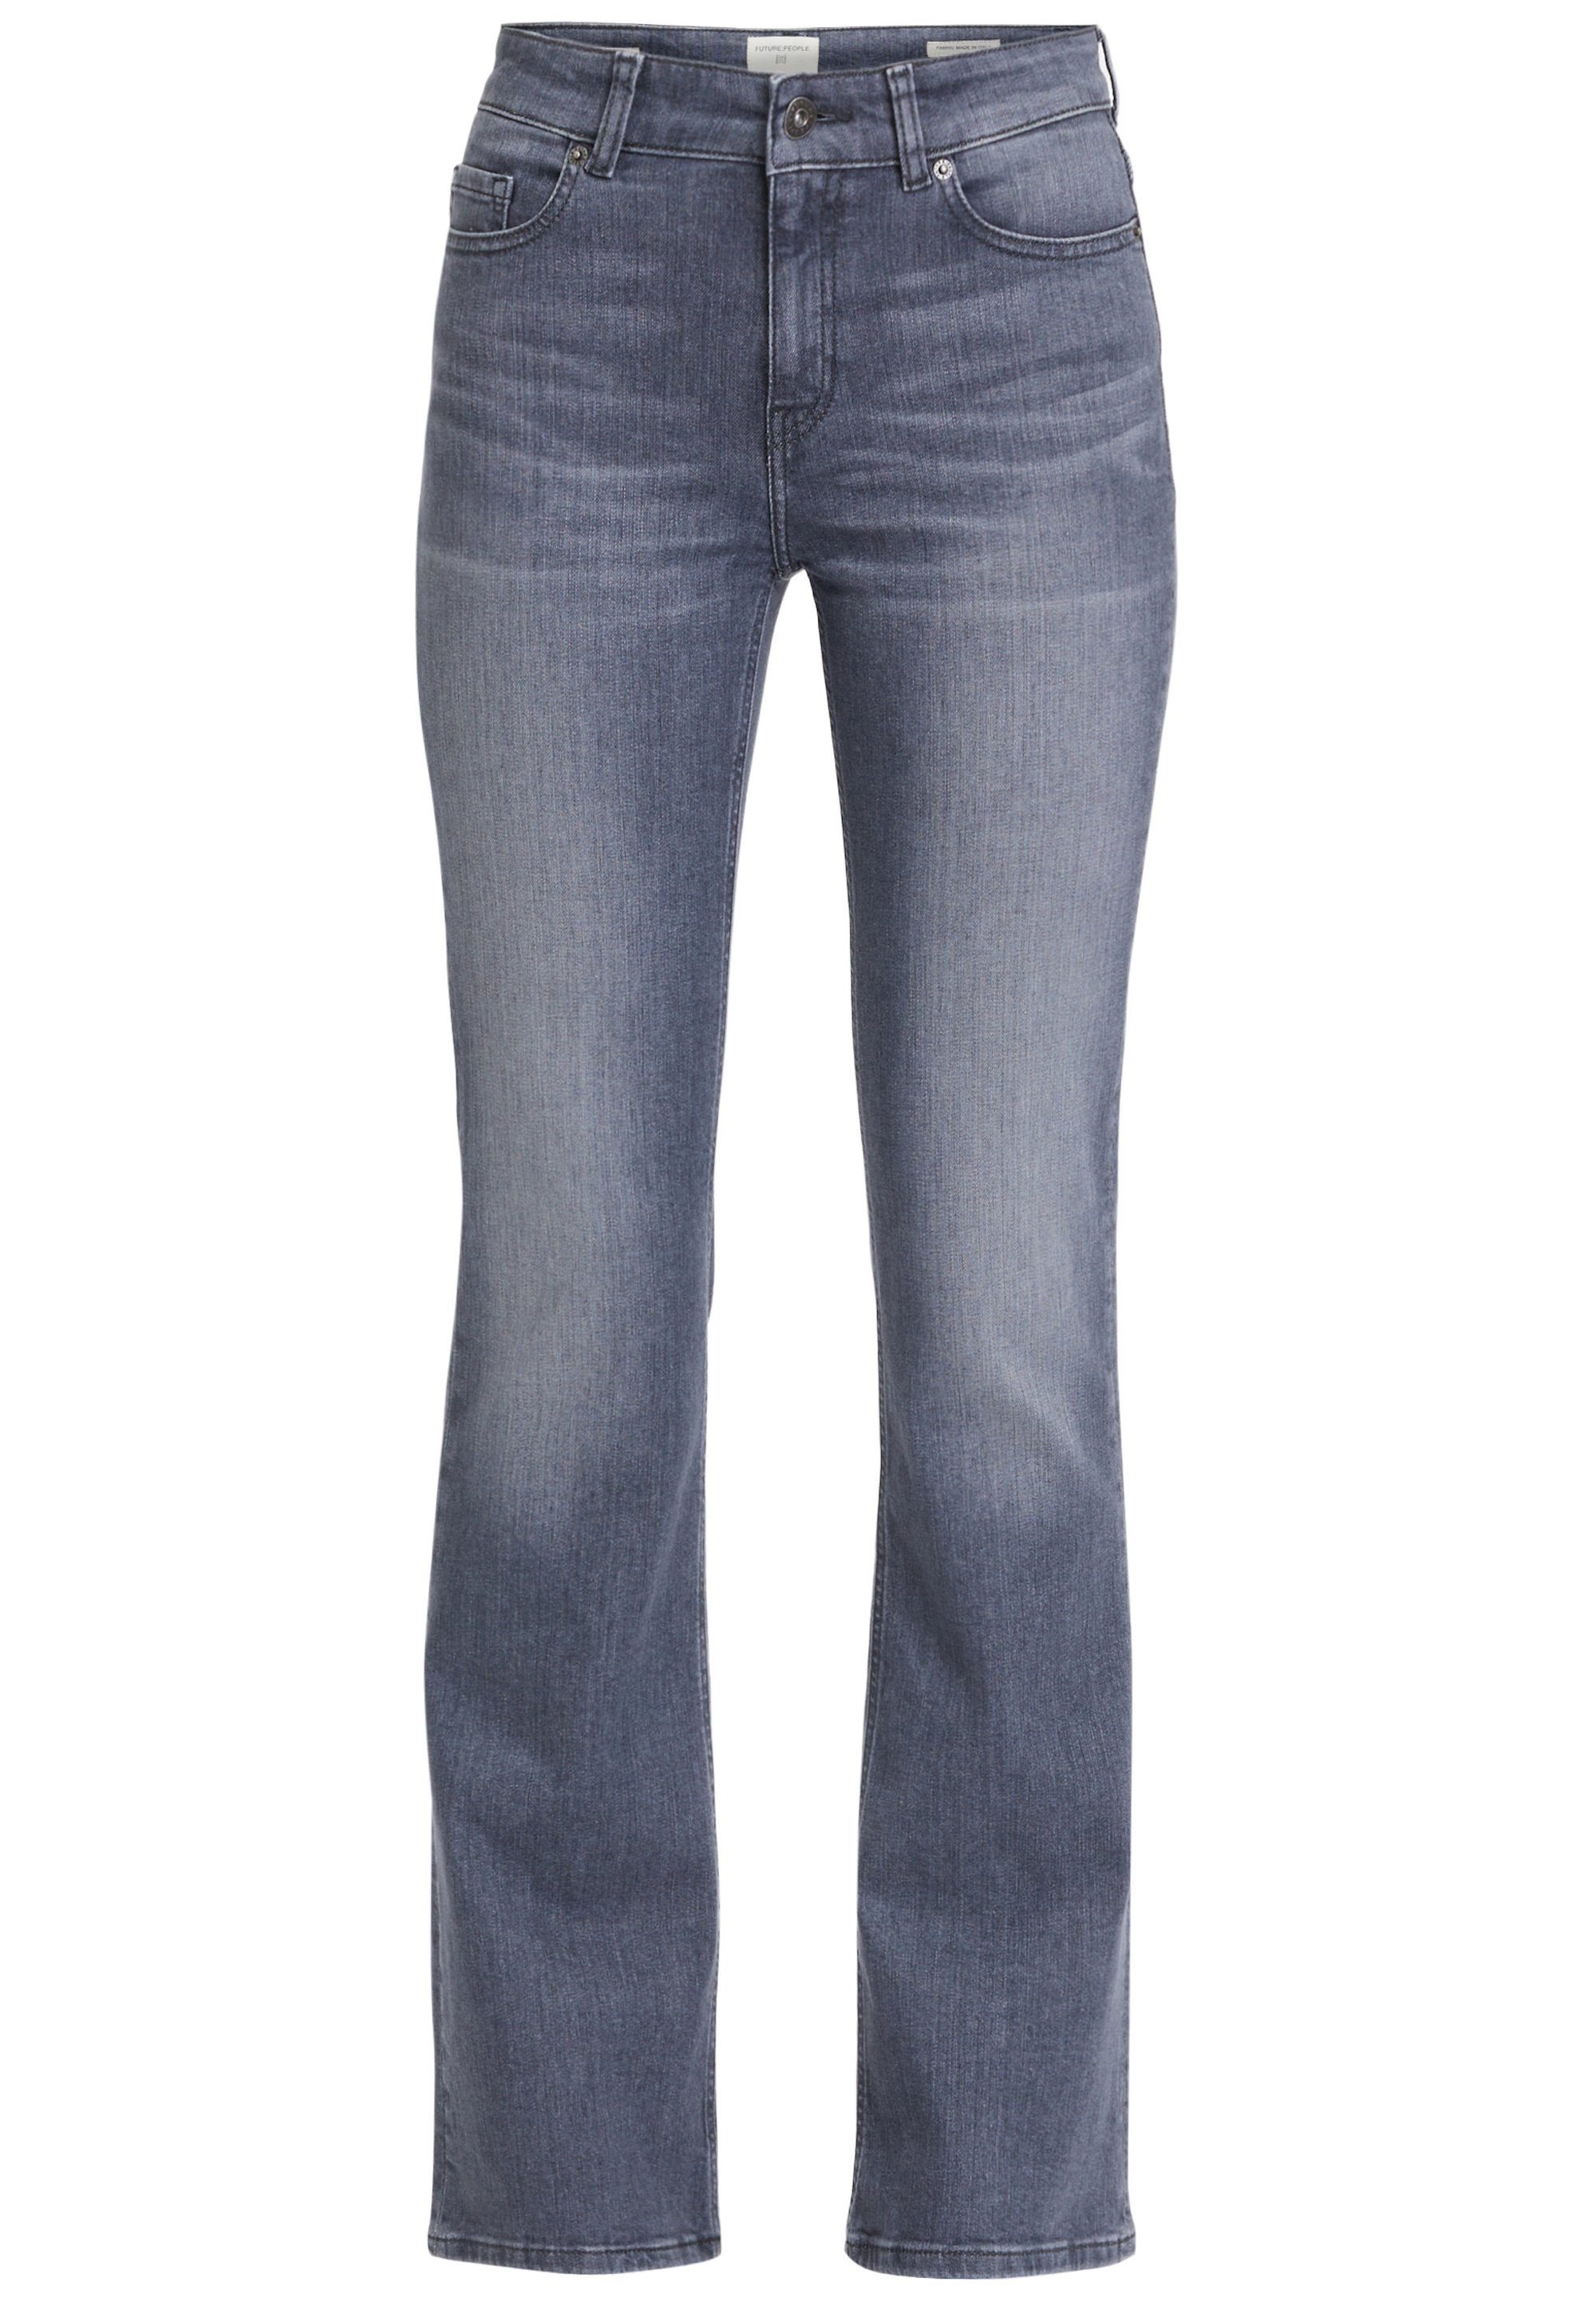 WAIST #WeC4F BOOTCUT MID We - Future. Care for 01:02 AUTHENTIC USED GREY - FUTURE:PEOPLE. Slim-fit-Jeans